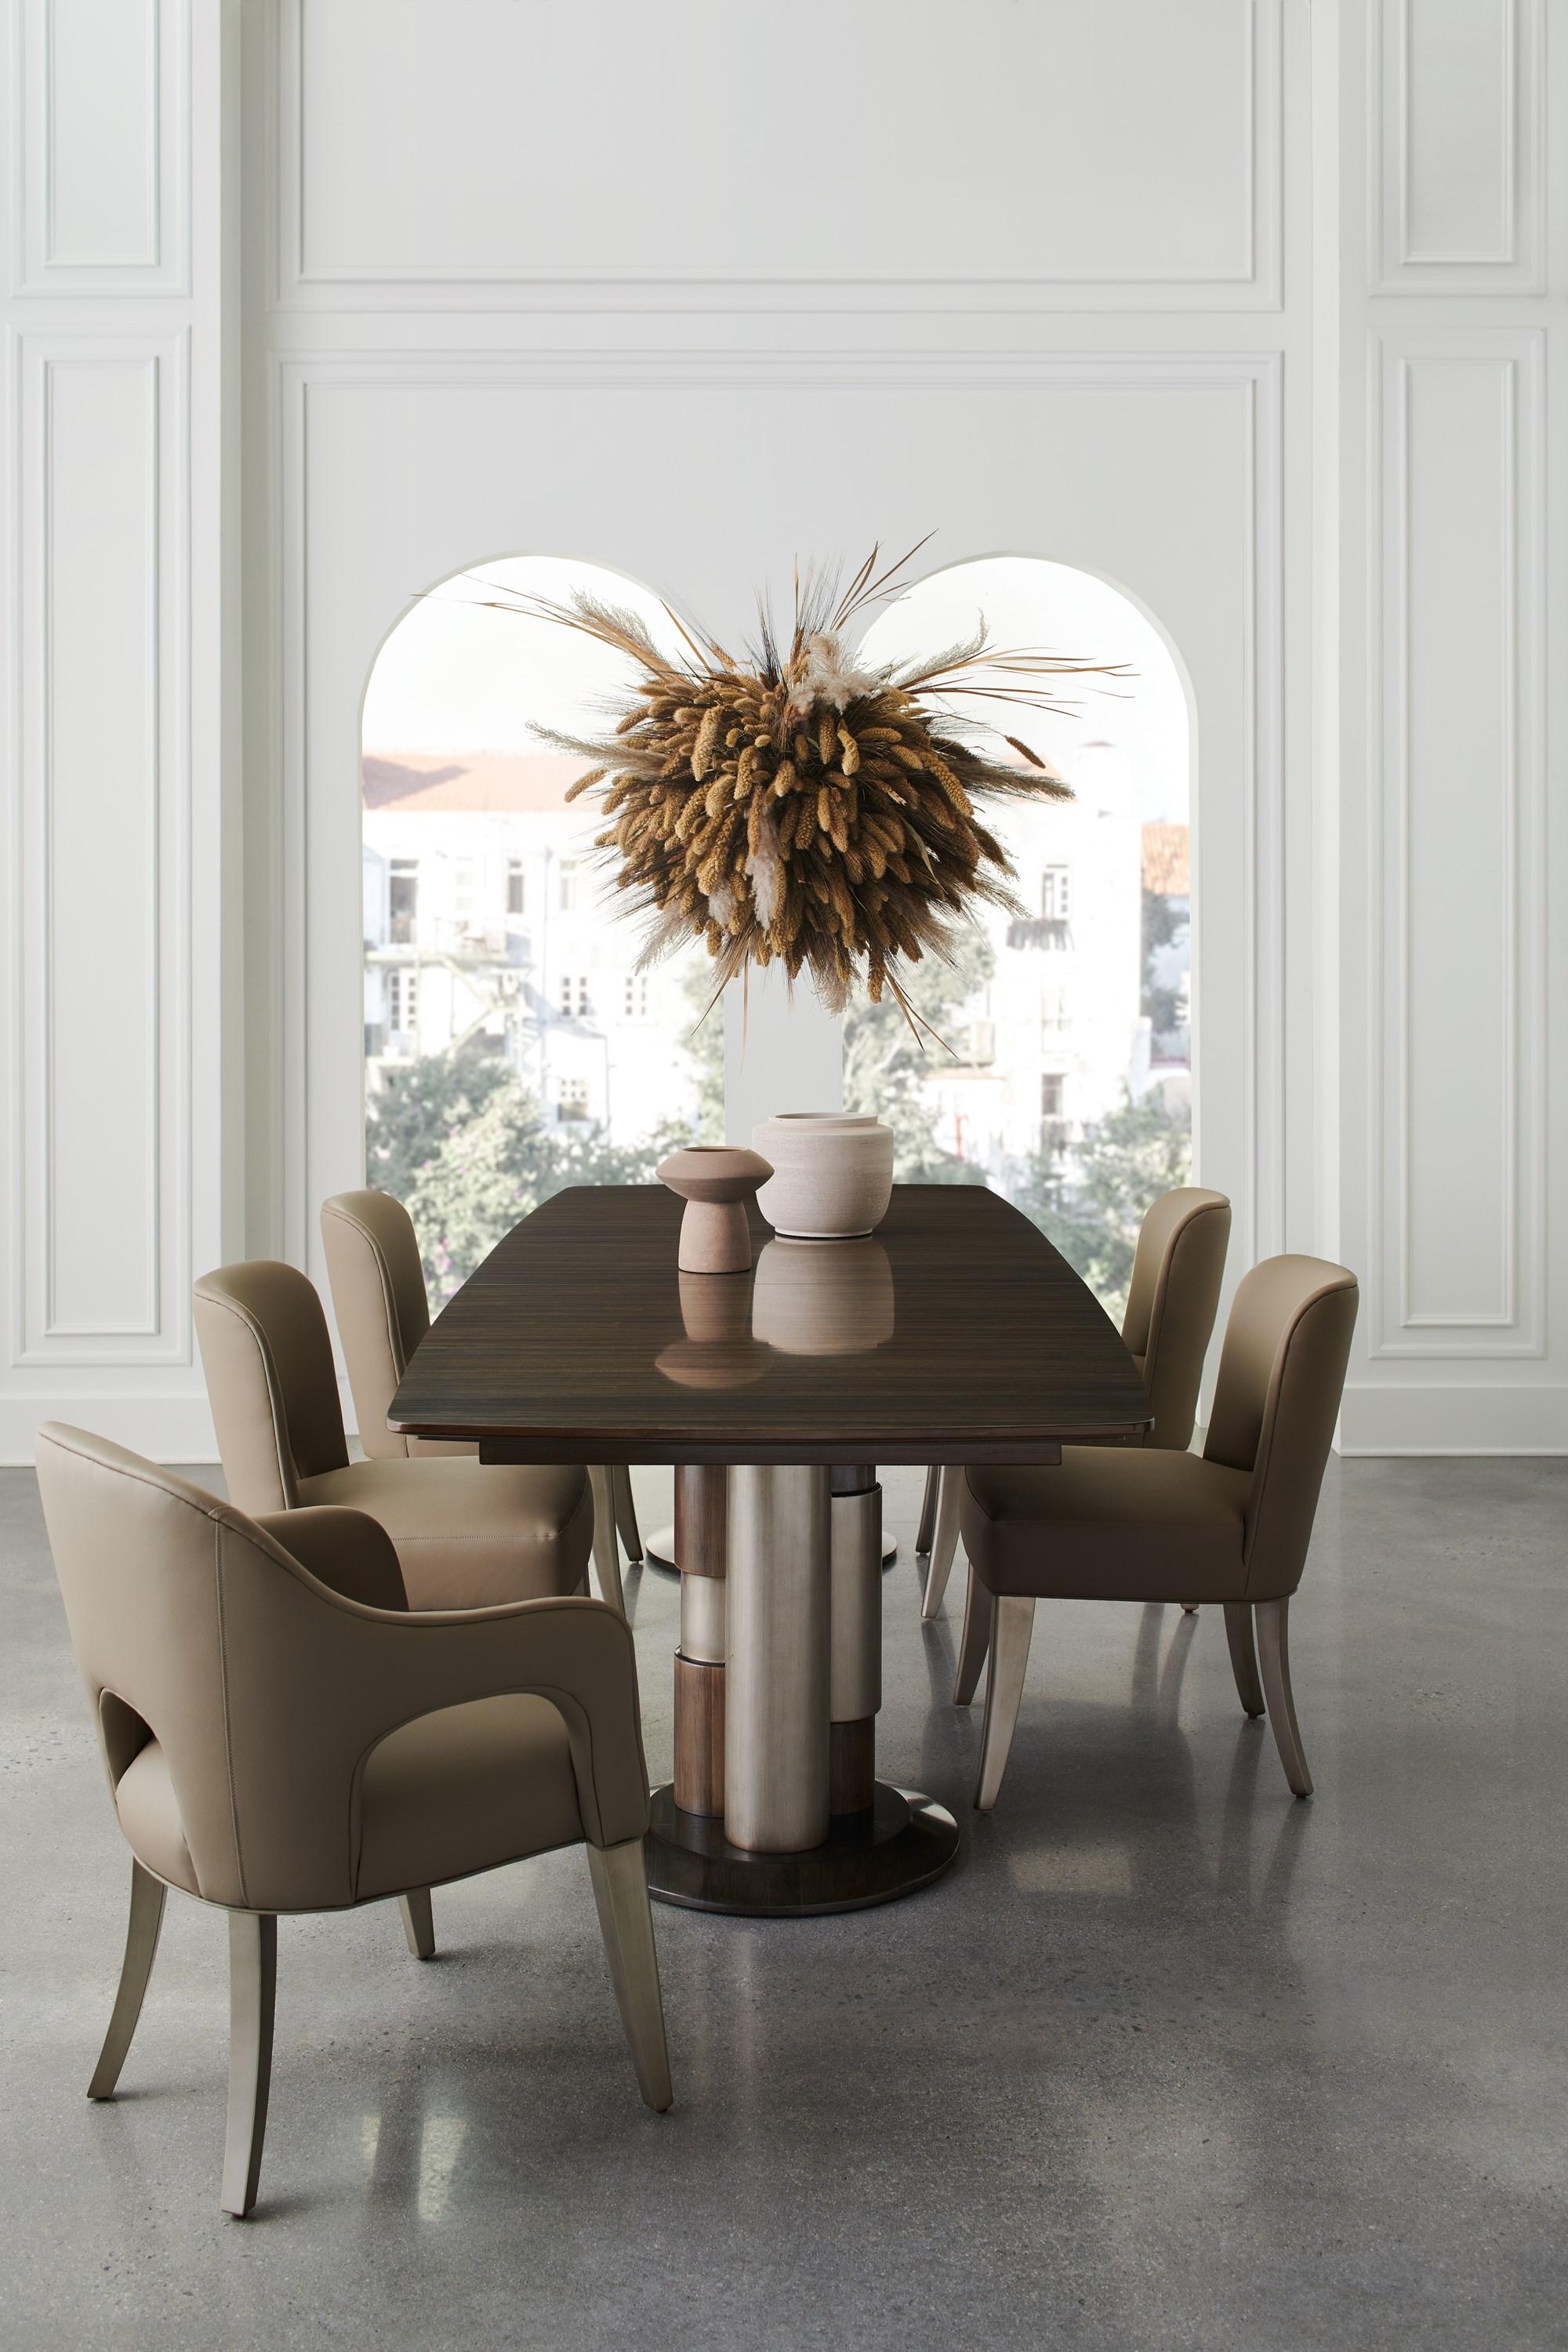 

    
Sepia & Smoked Stainless Steel Modern LA MODA DINING TABLE by Caracole
